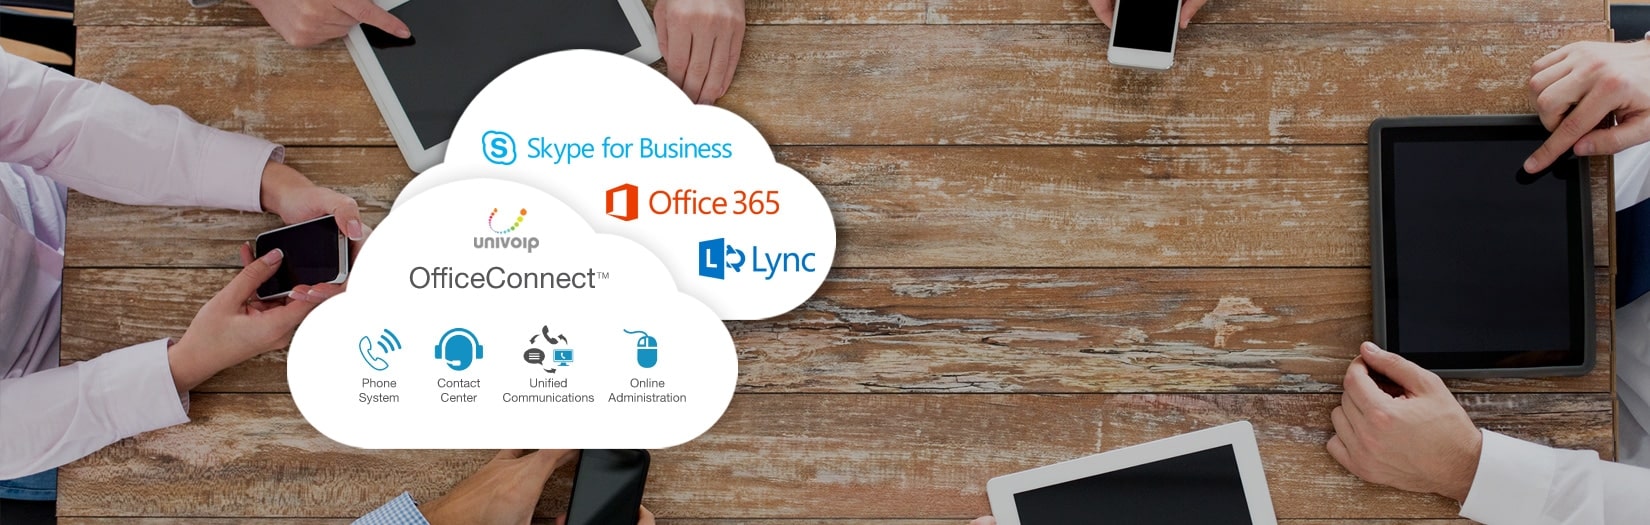 UniVoIP Enterprise Solution for Skype for Business Integrates Seamlessly with the Microsoft Application